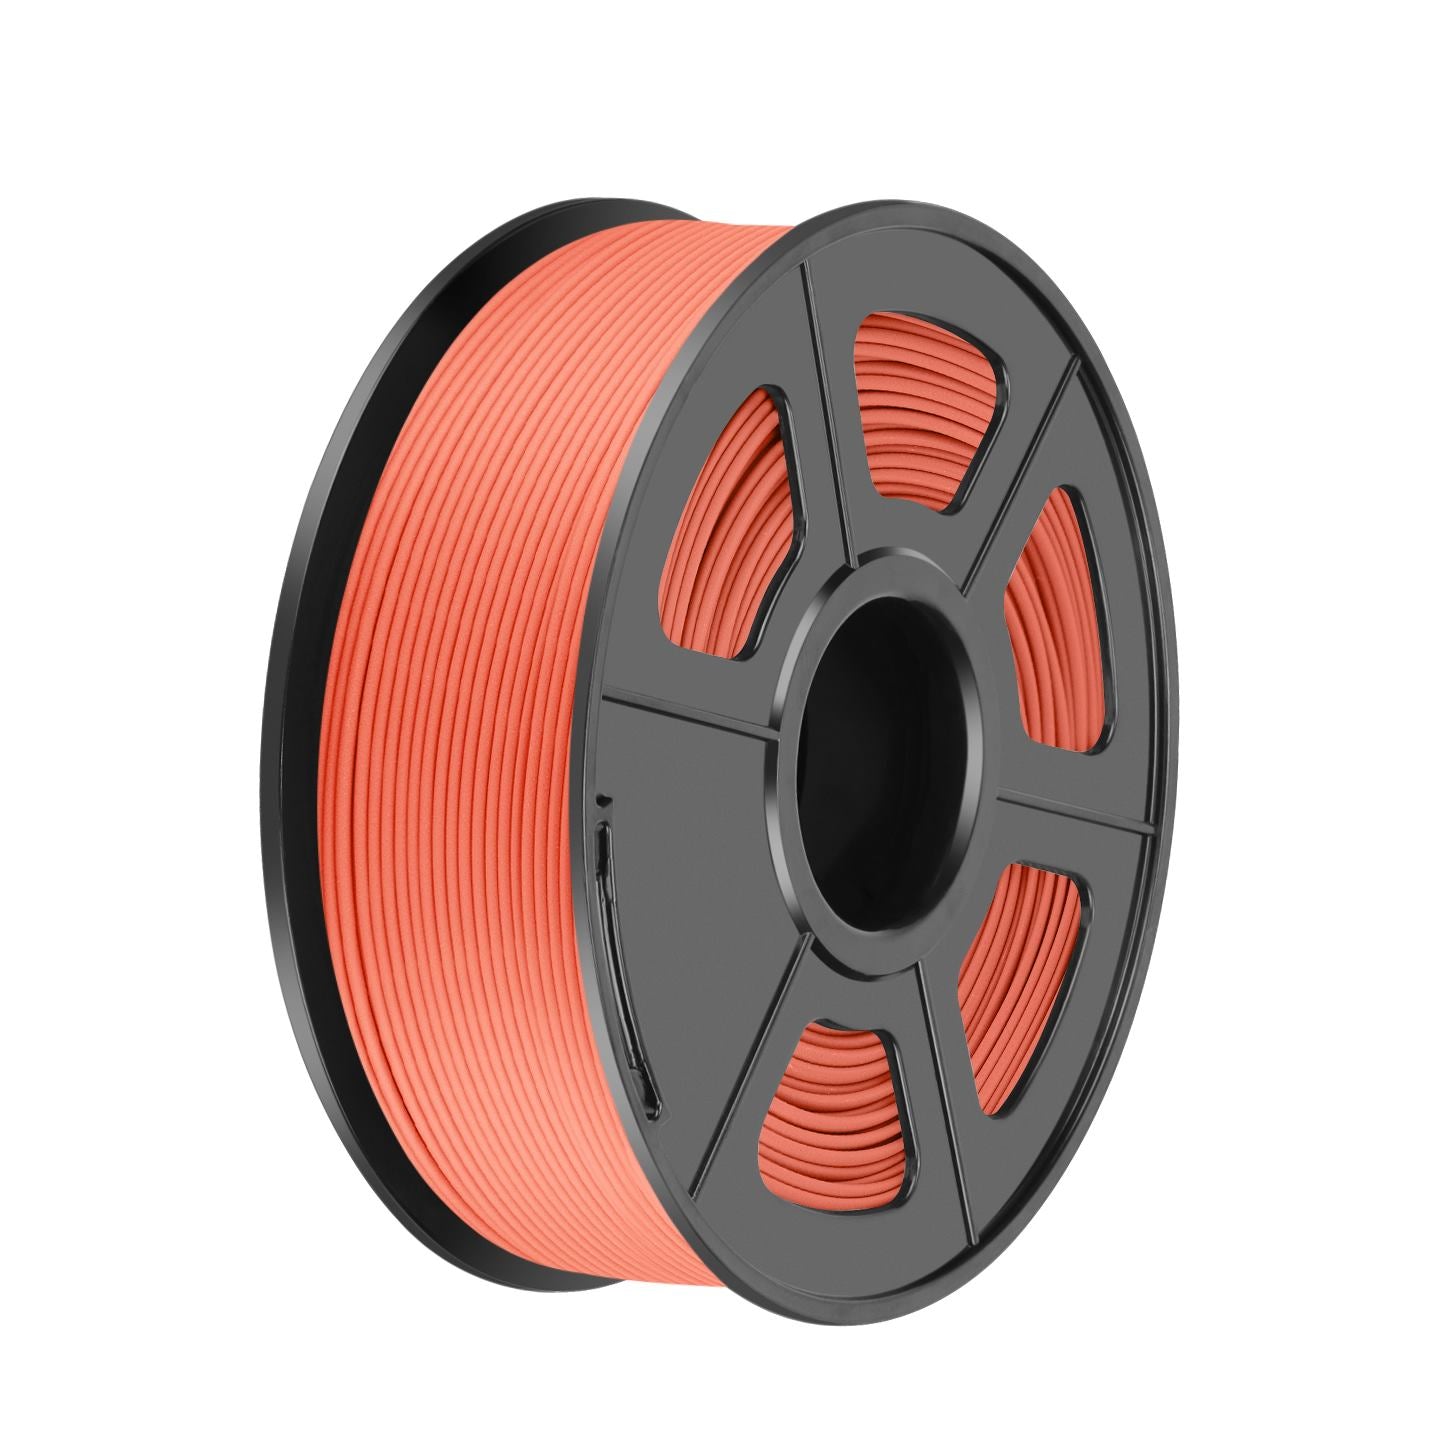 10 Rolls SUNLU PETG 3D Printer Filament with Spool Accuracy +/- 0.02 mm  Smoothly